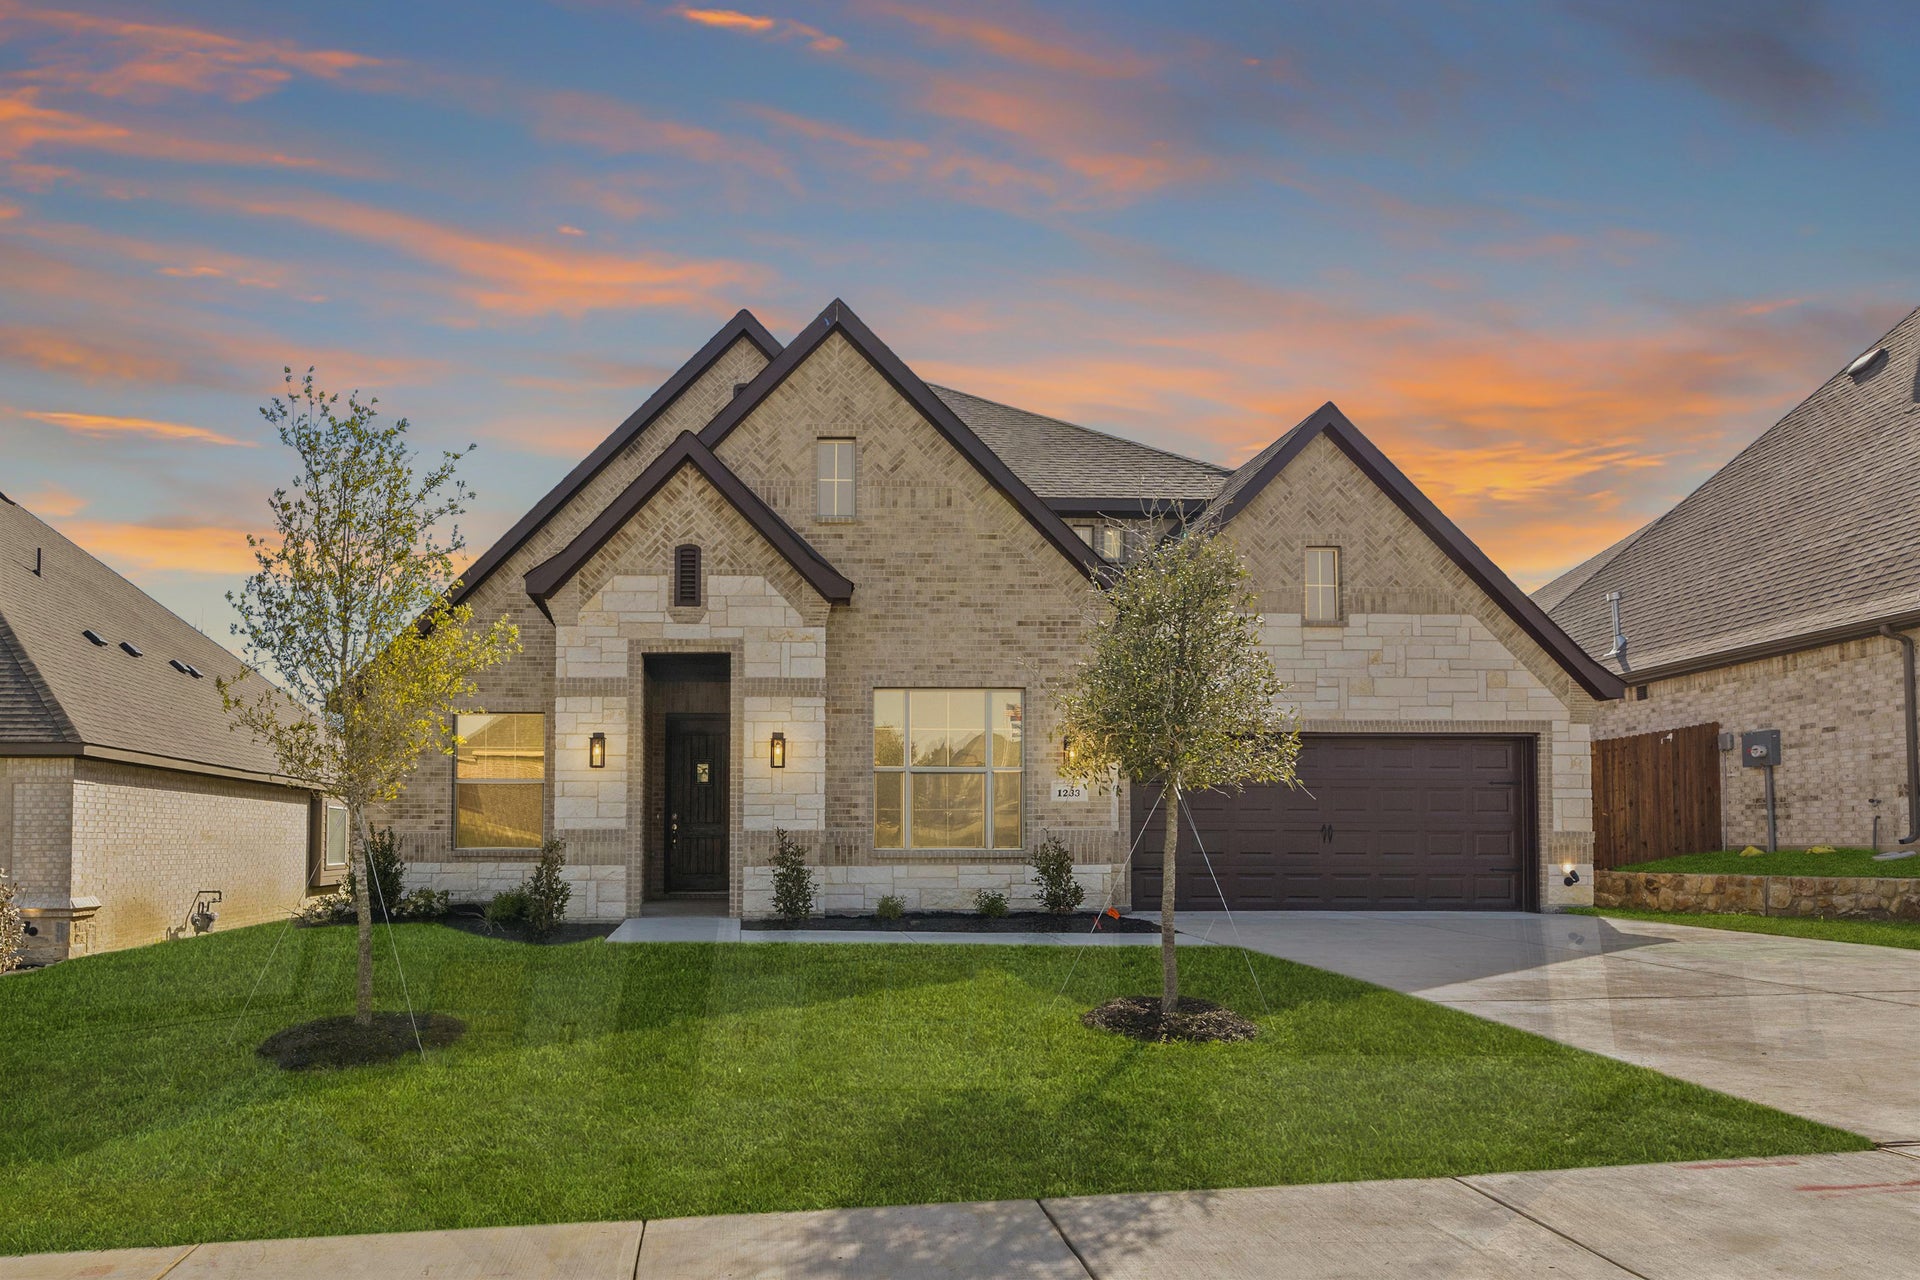 3br New Home in Waxahachie, TX